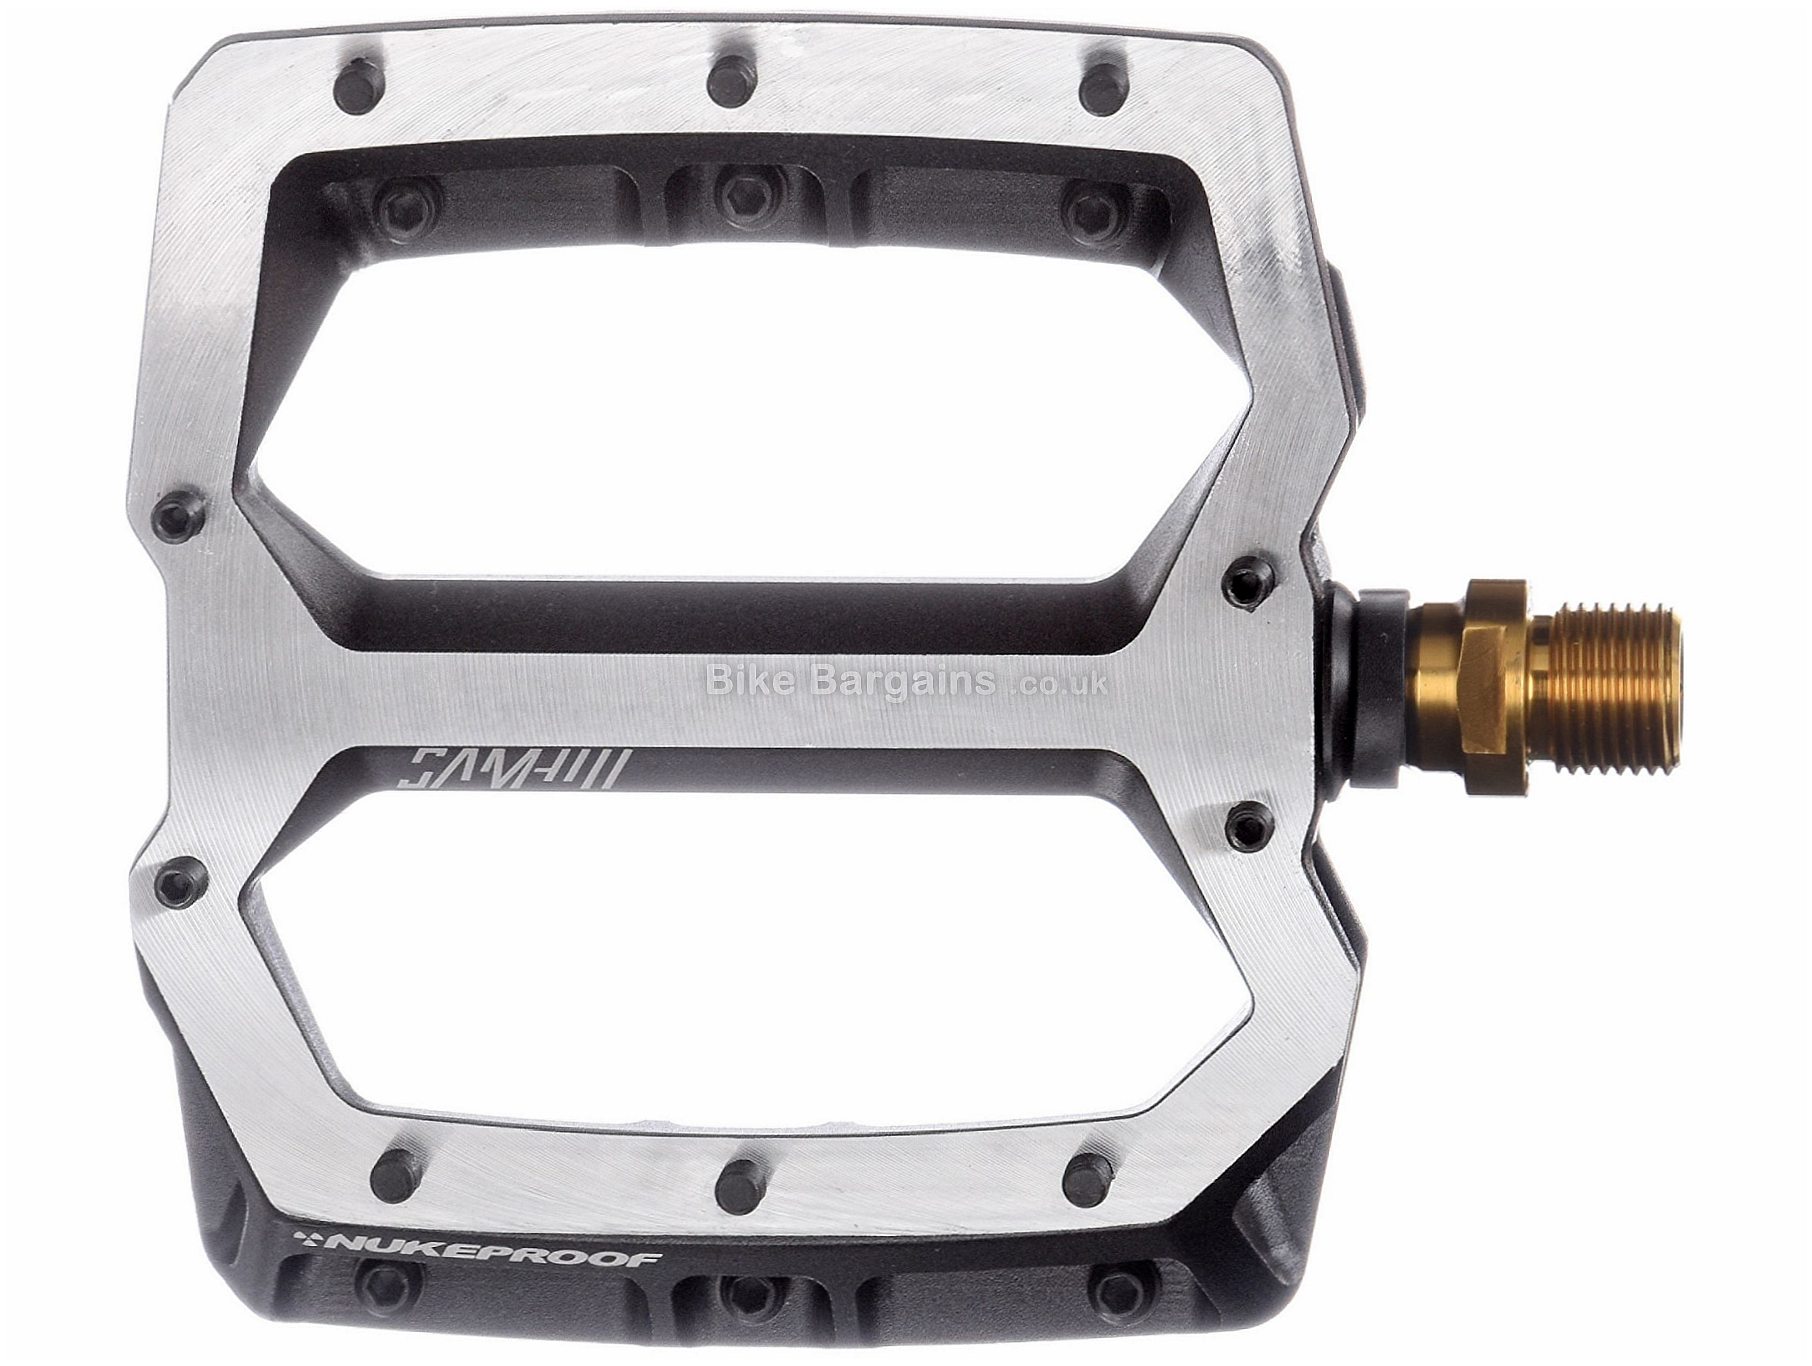 Nukeproof Horizon Pro Ti Sam Hill DH Flat Pedals - £60! | Pedals